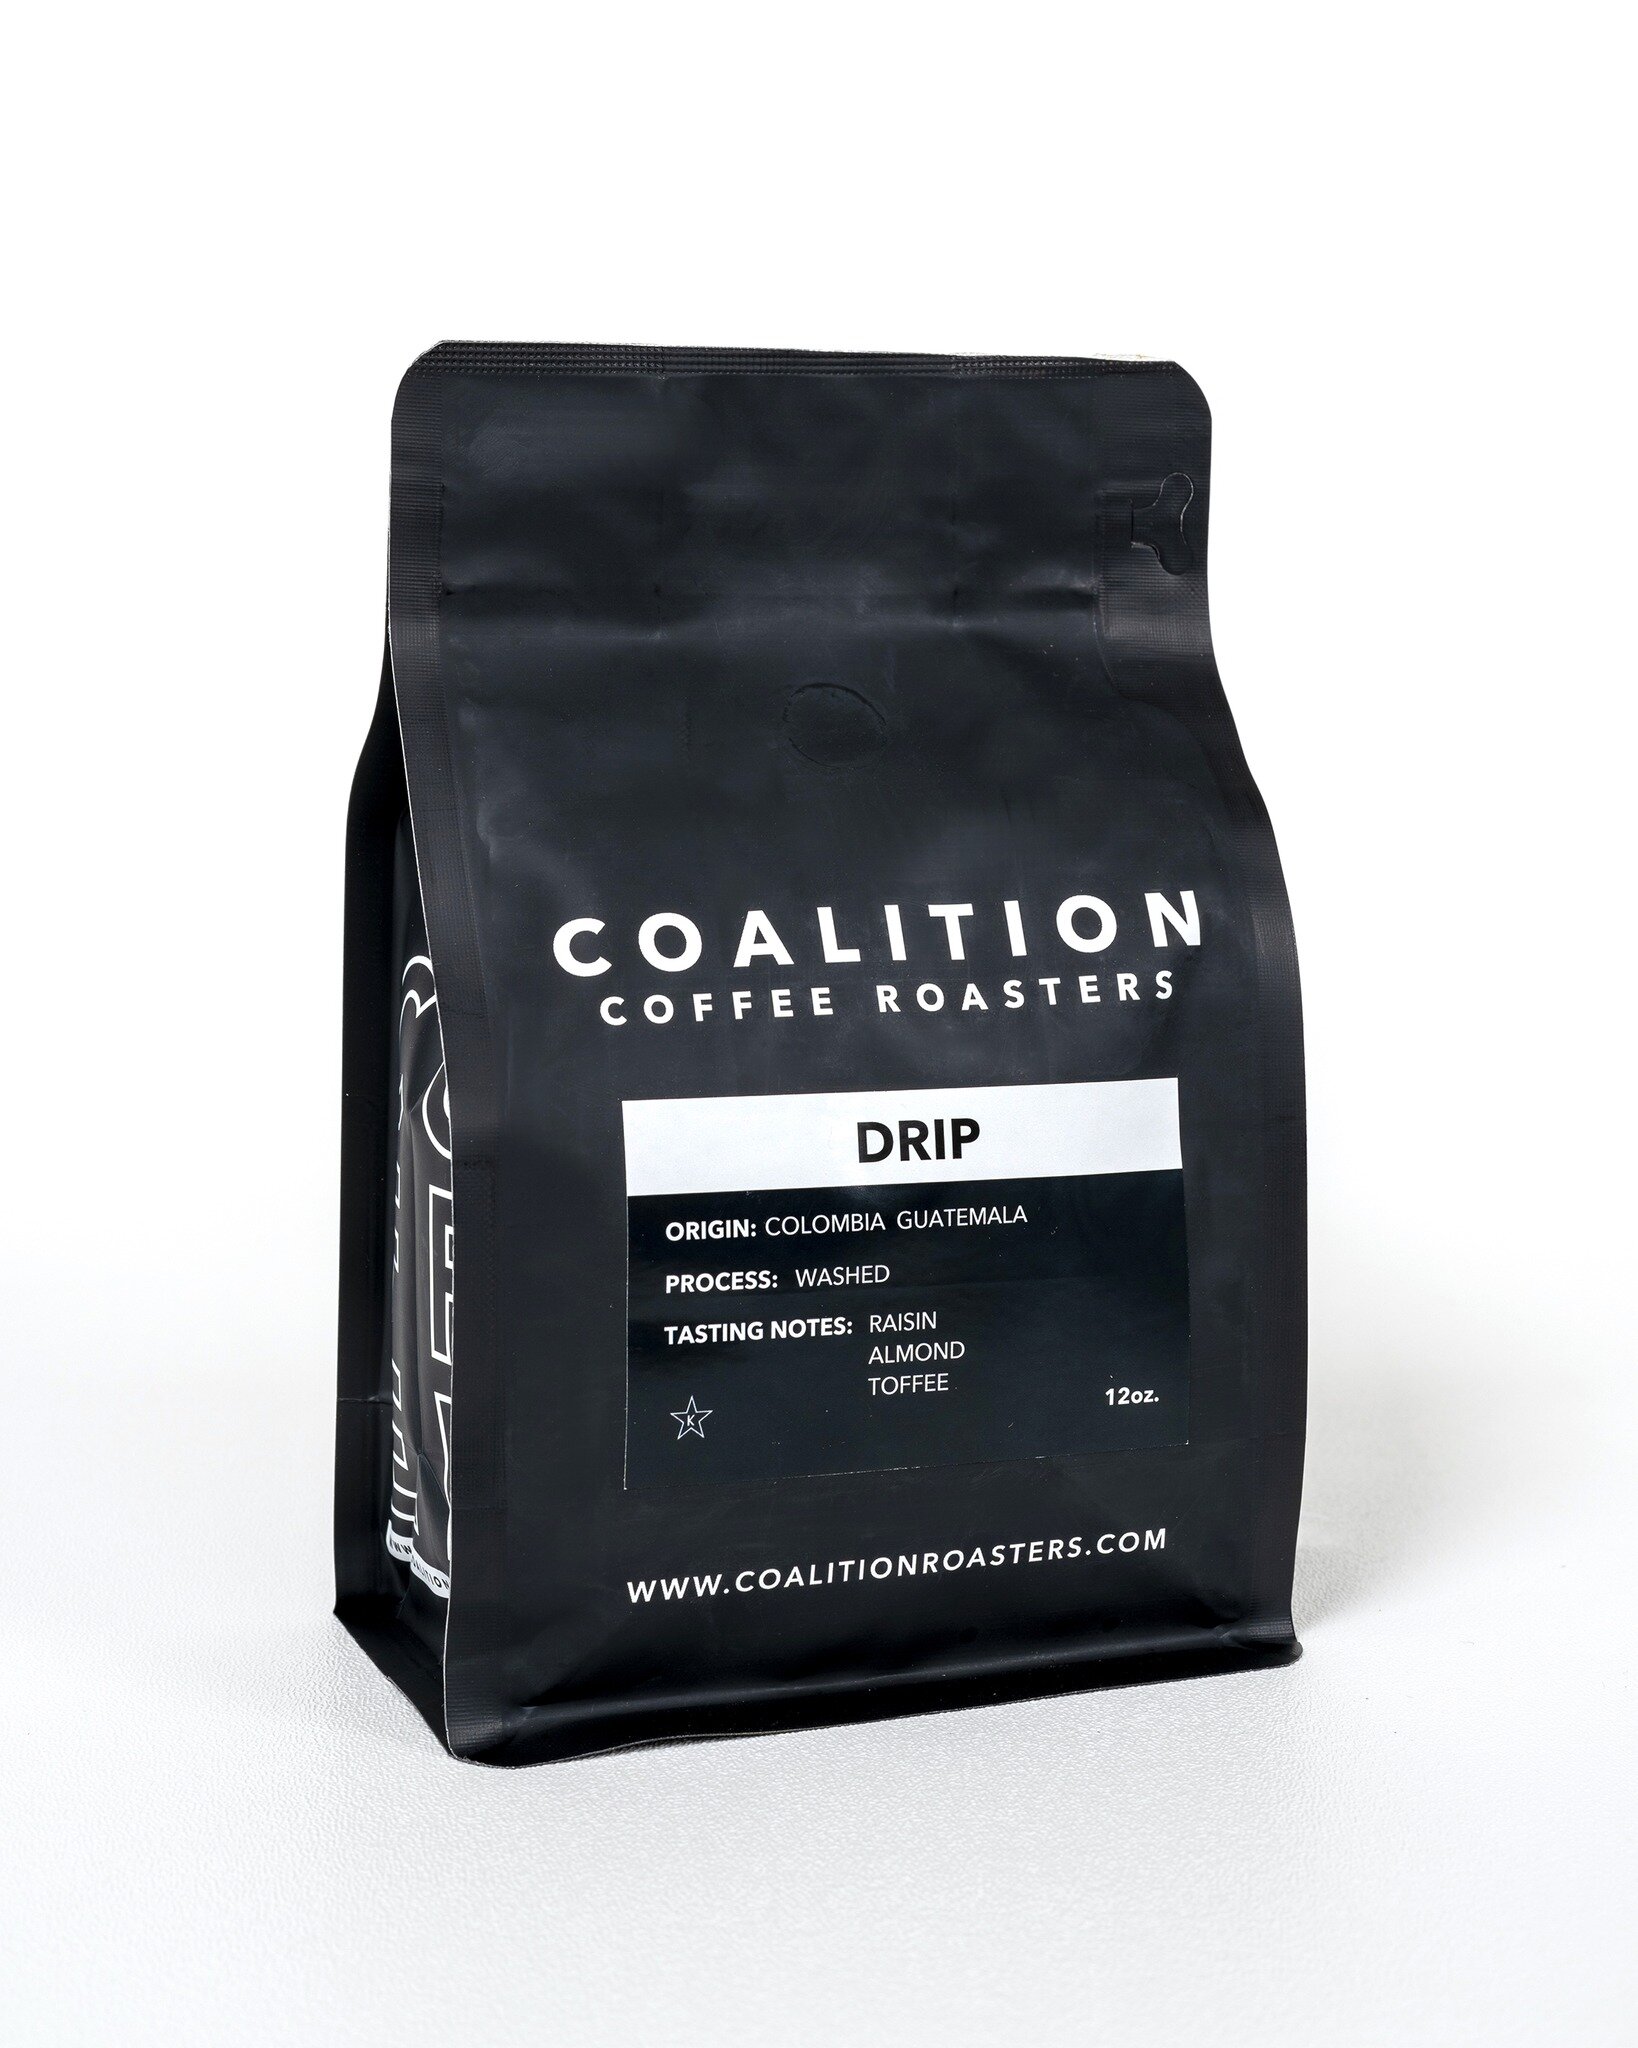 Coalition&rsquo;s Drip 🖤

✨ Origin: Colombia, Peru, Ethiopia

✨ Tasting Notes: Raisin, Almond, Toffee

✨ A modern blend of high grown coffees, the Drip Blend offers a refined acidity, balanced by a honey sweetness and ending with a subtle touch of f